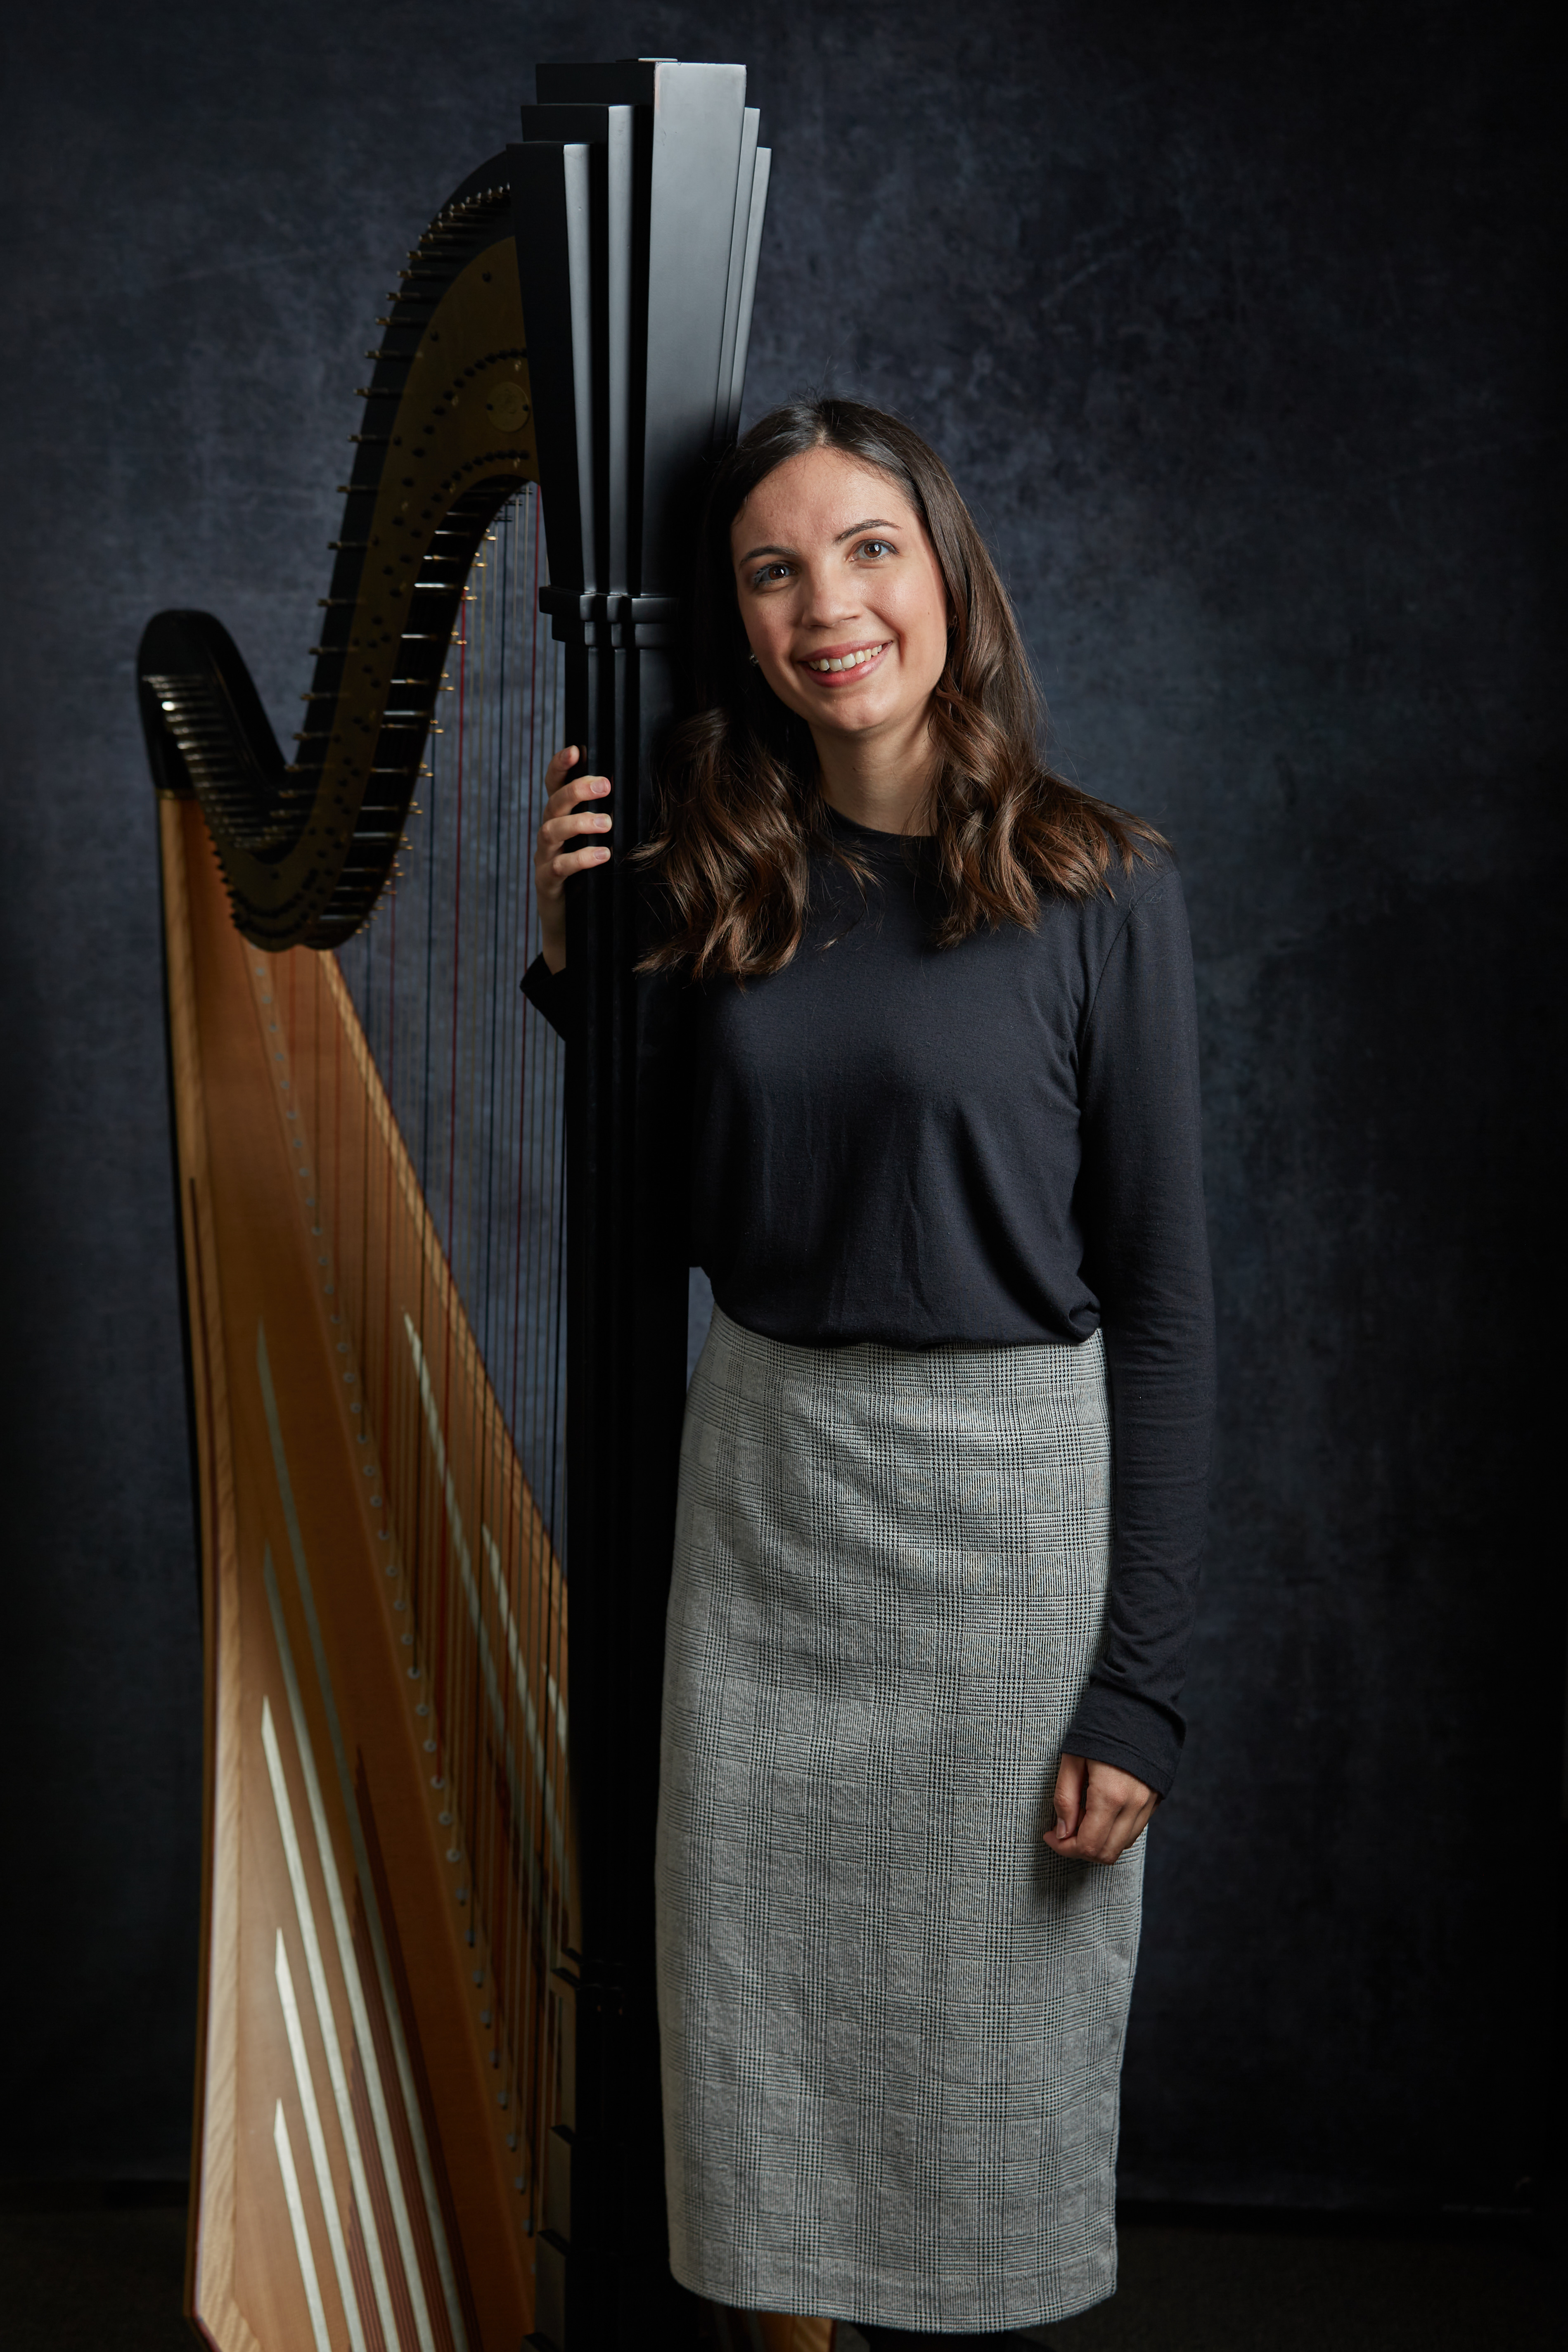 Brittany Blair posing next to a harp